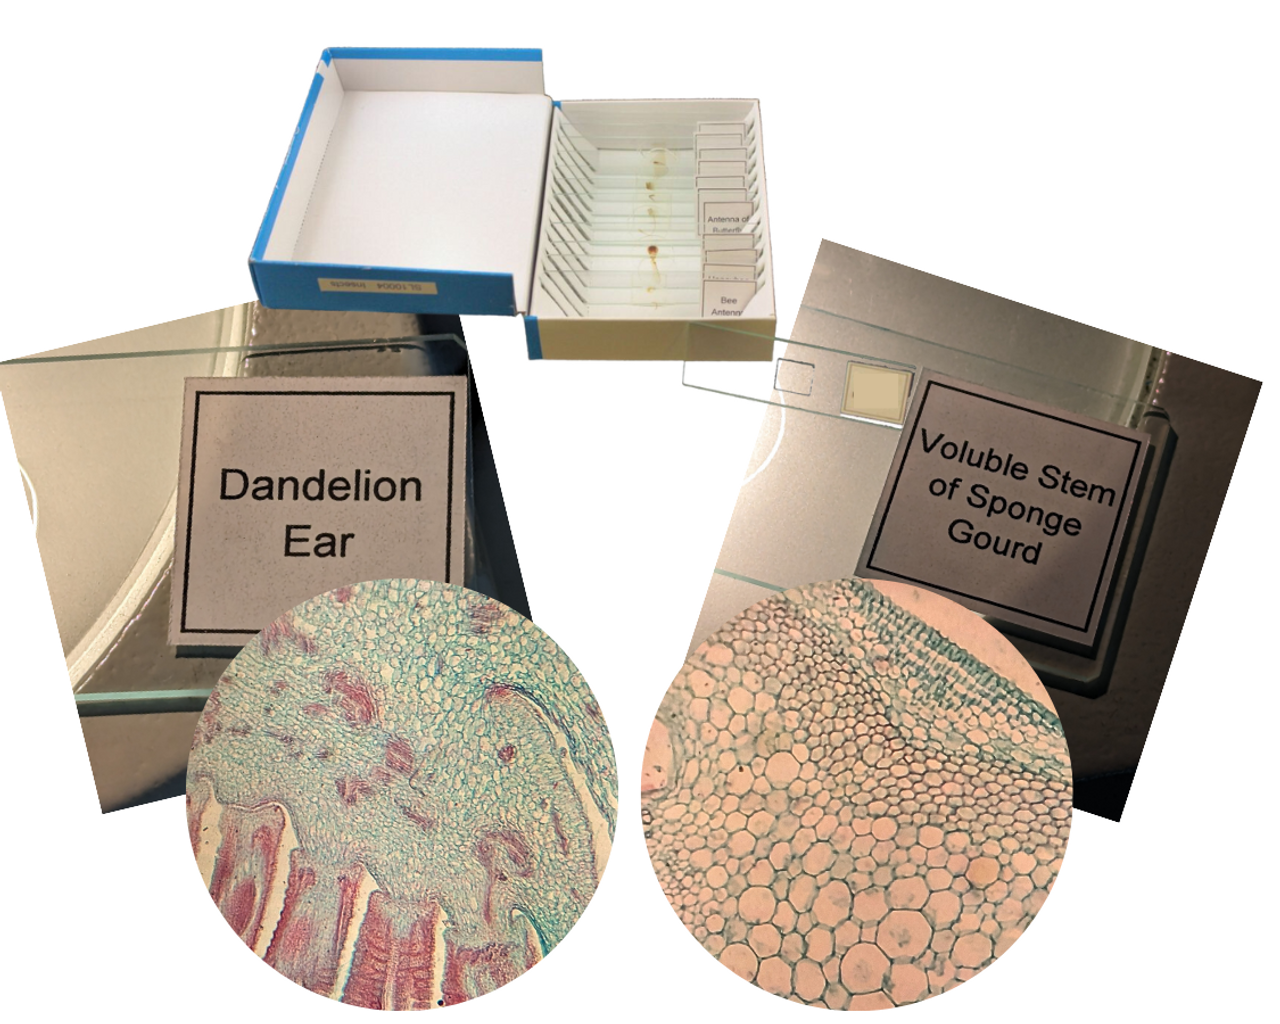 Each set includes twelve different slides. Slides are glass.

Slides for this set include: Silver Berry Scaly Hair, Onion Rind, Fern Spore, Herbaceous Stem of Bitterweed, Voluble Stem of Sponge Gourd, Xeromorf Leaf of Nerium, Monocotyledonous Stem of Corn, Dandelion Ear, Tree Cell, Camellia Leaf Section, Woody Stem of Pine and Pine Needle c.s.